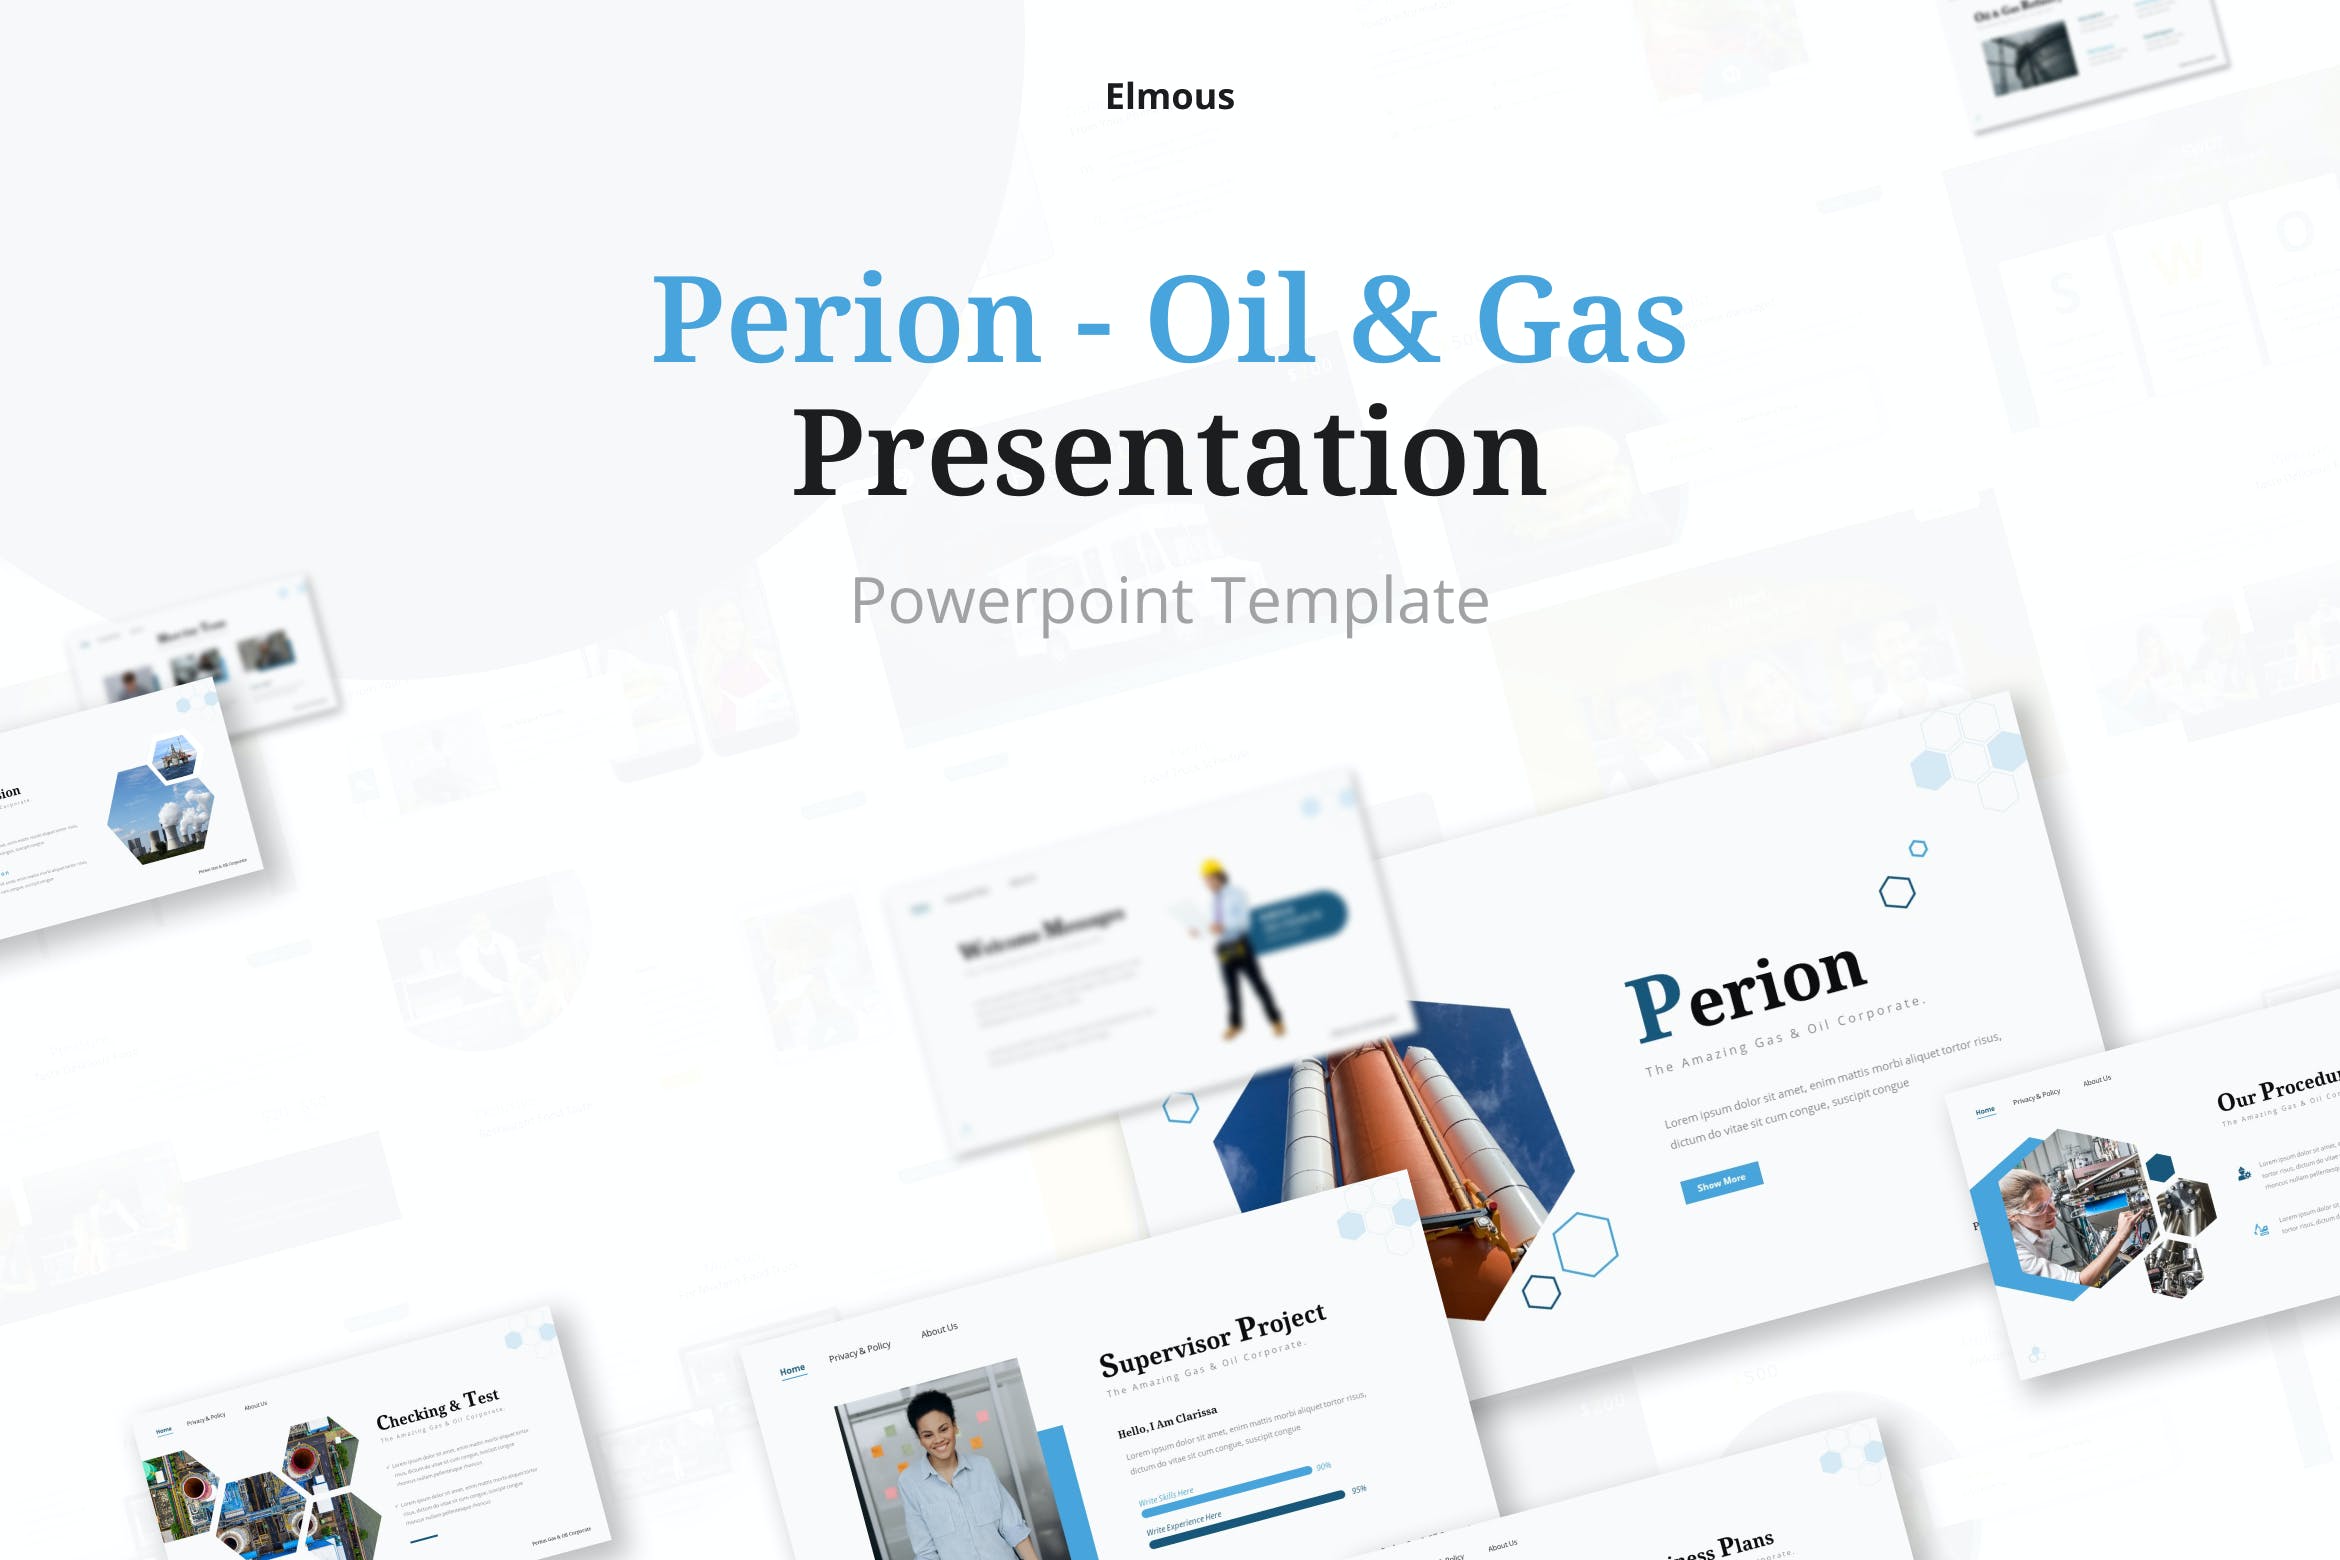 Cover image of Perion Gas & Oil Powerpoint Presentation Template.